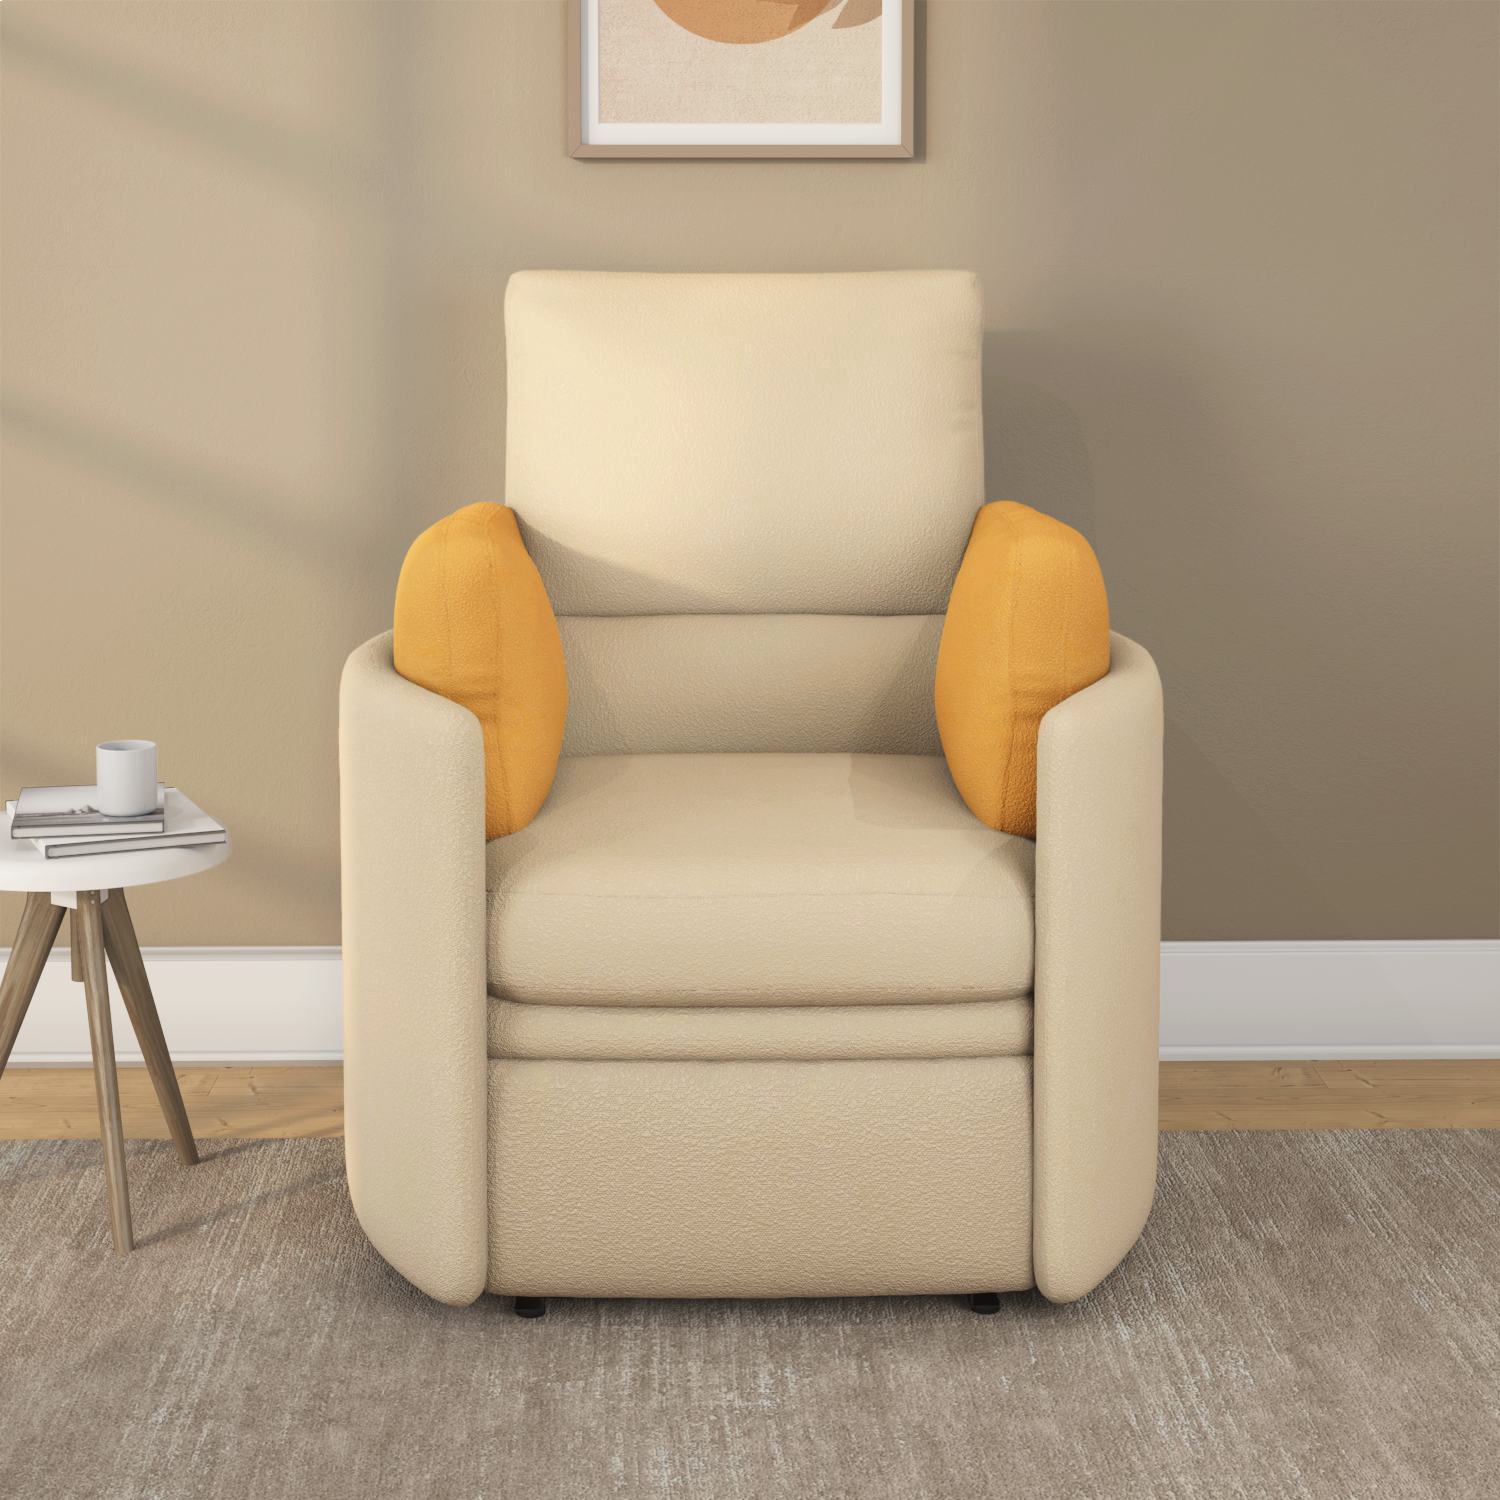 Cherish 1 Seater Electric Rocker Recliner with Cushions (Sand Beige)